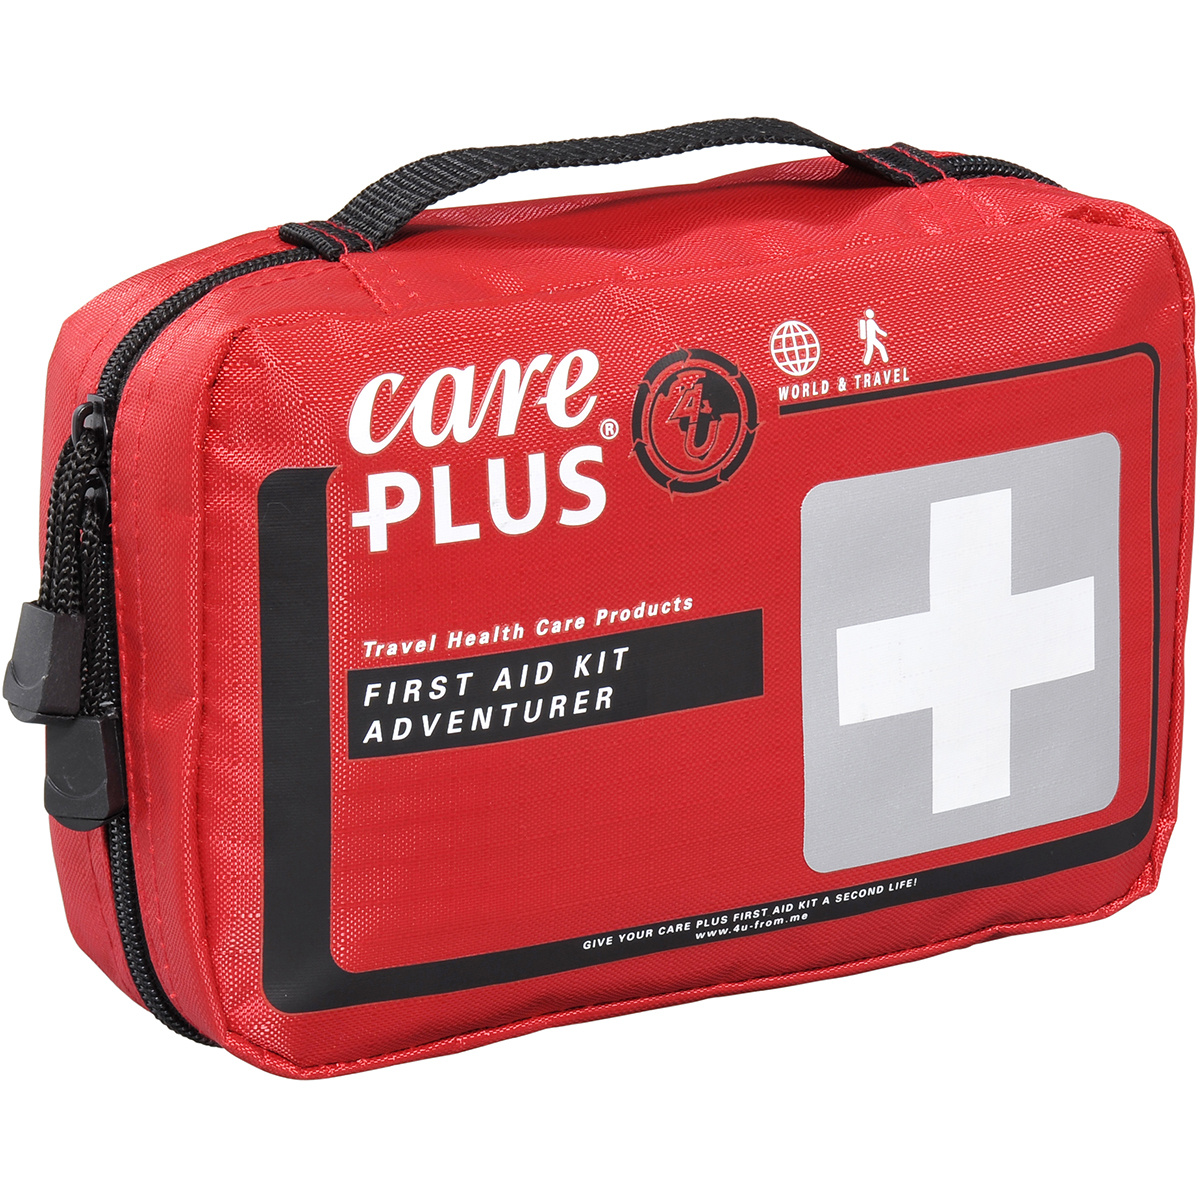 Image of Care Plus First Aid Kit Adventurer